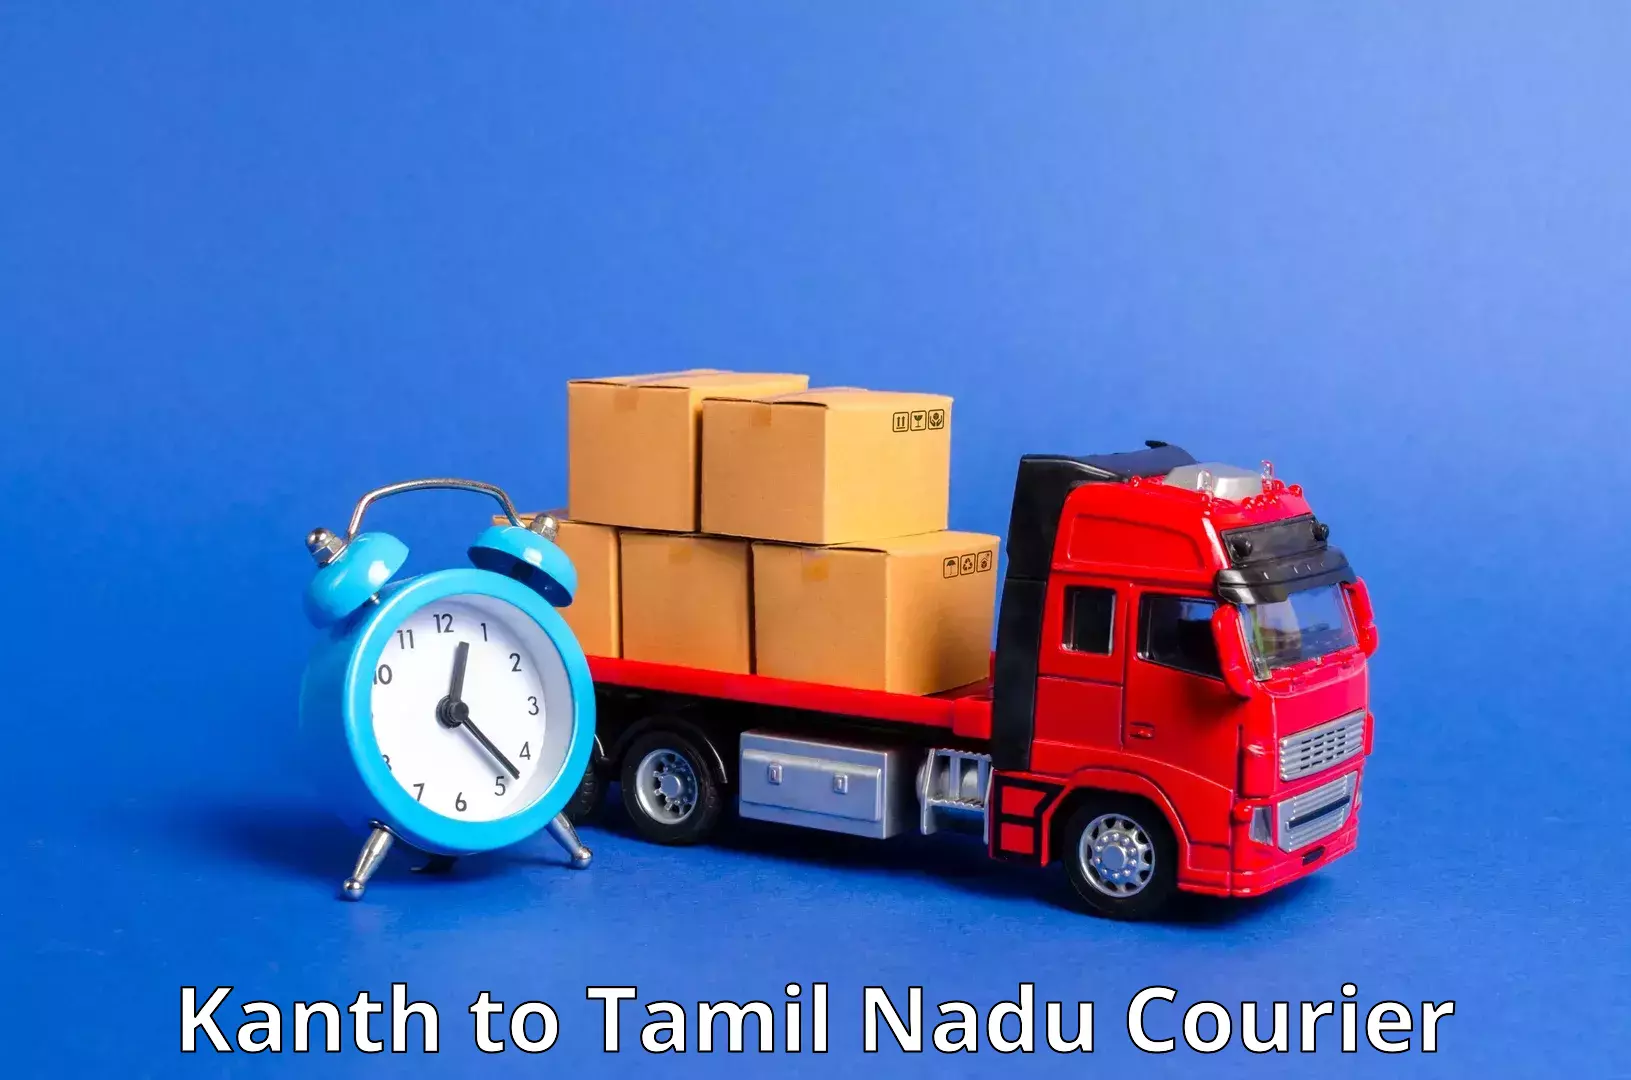 Nationwide courier service in Kanth to Tamil Nadu